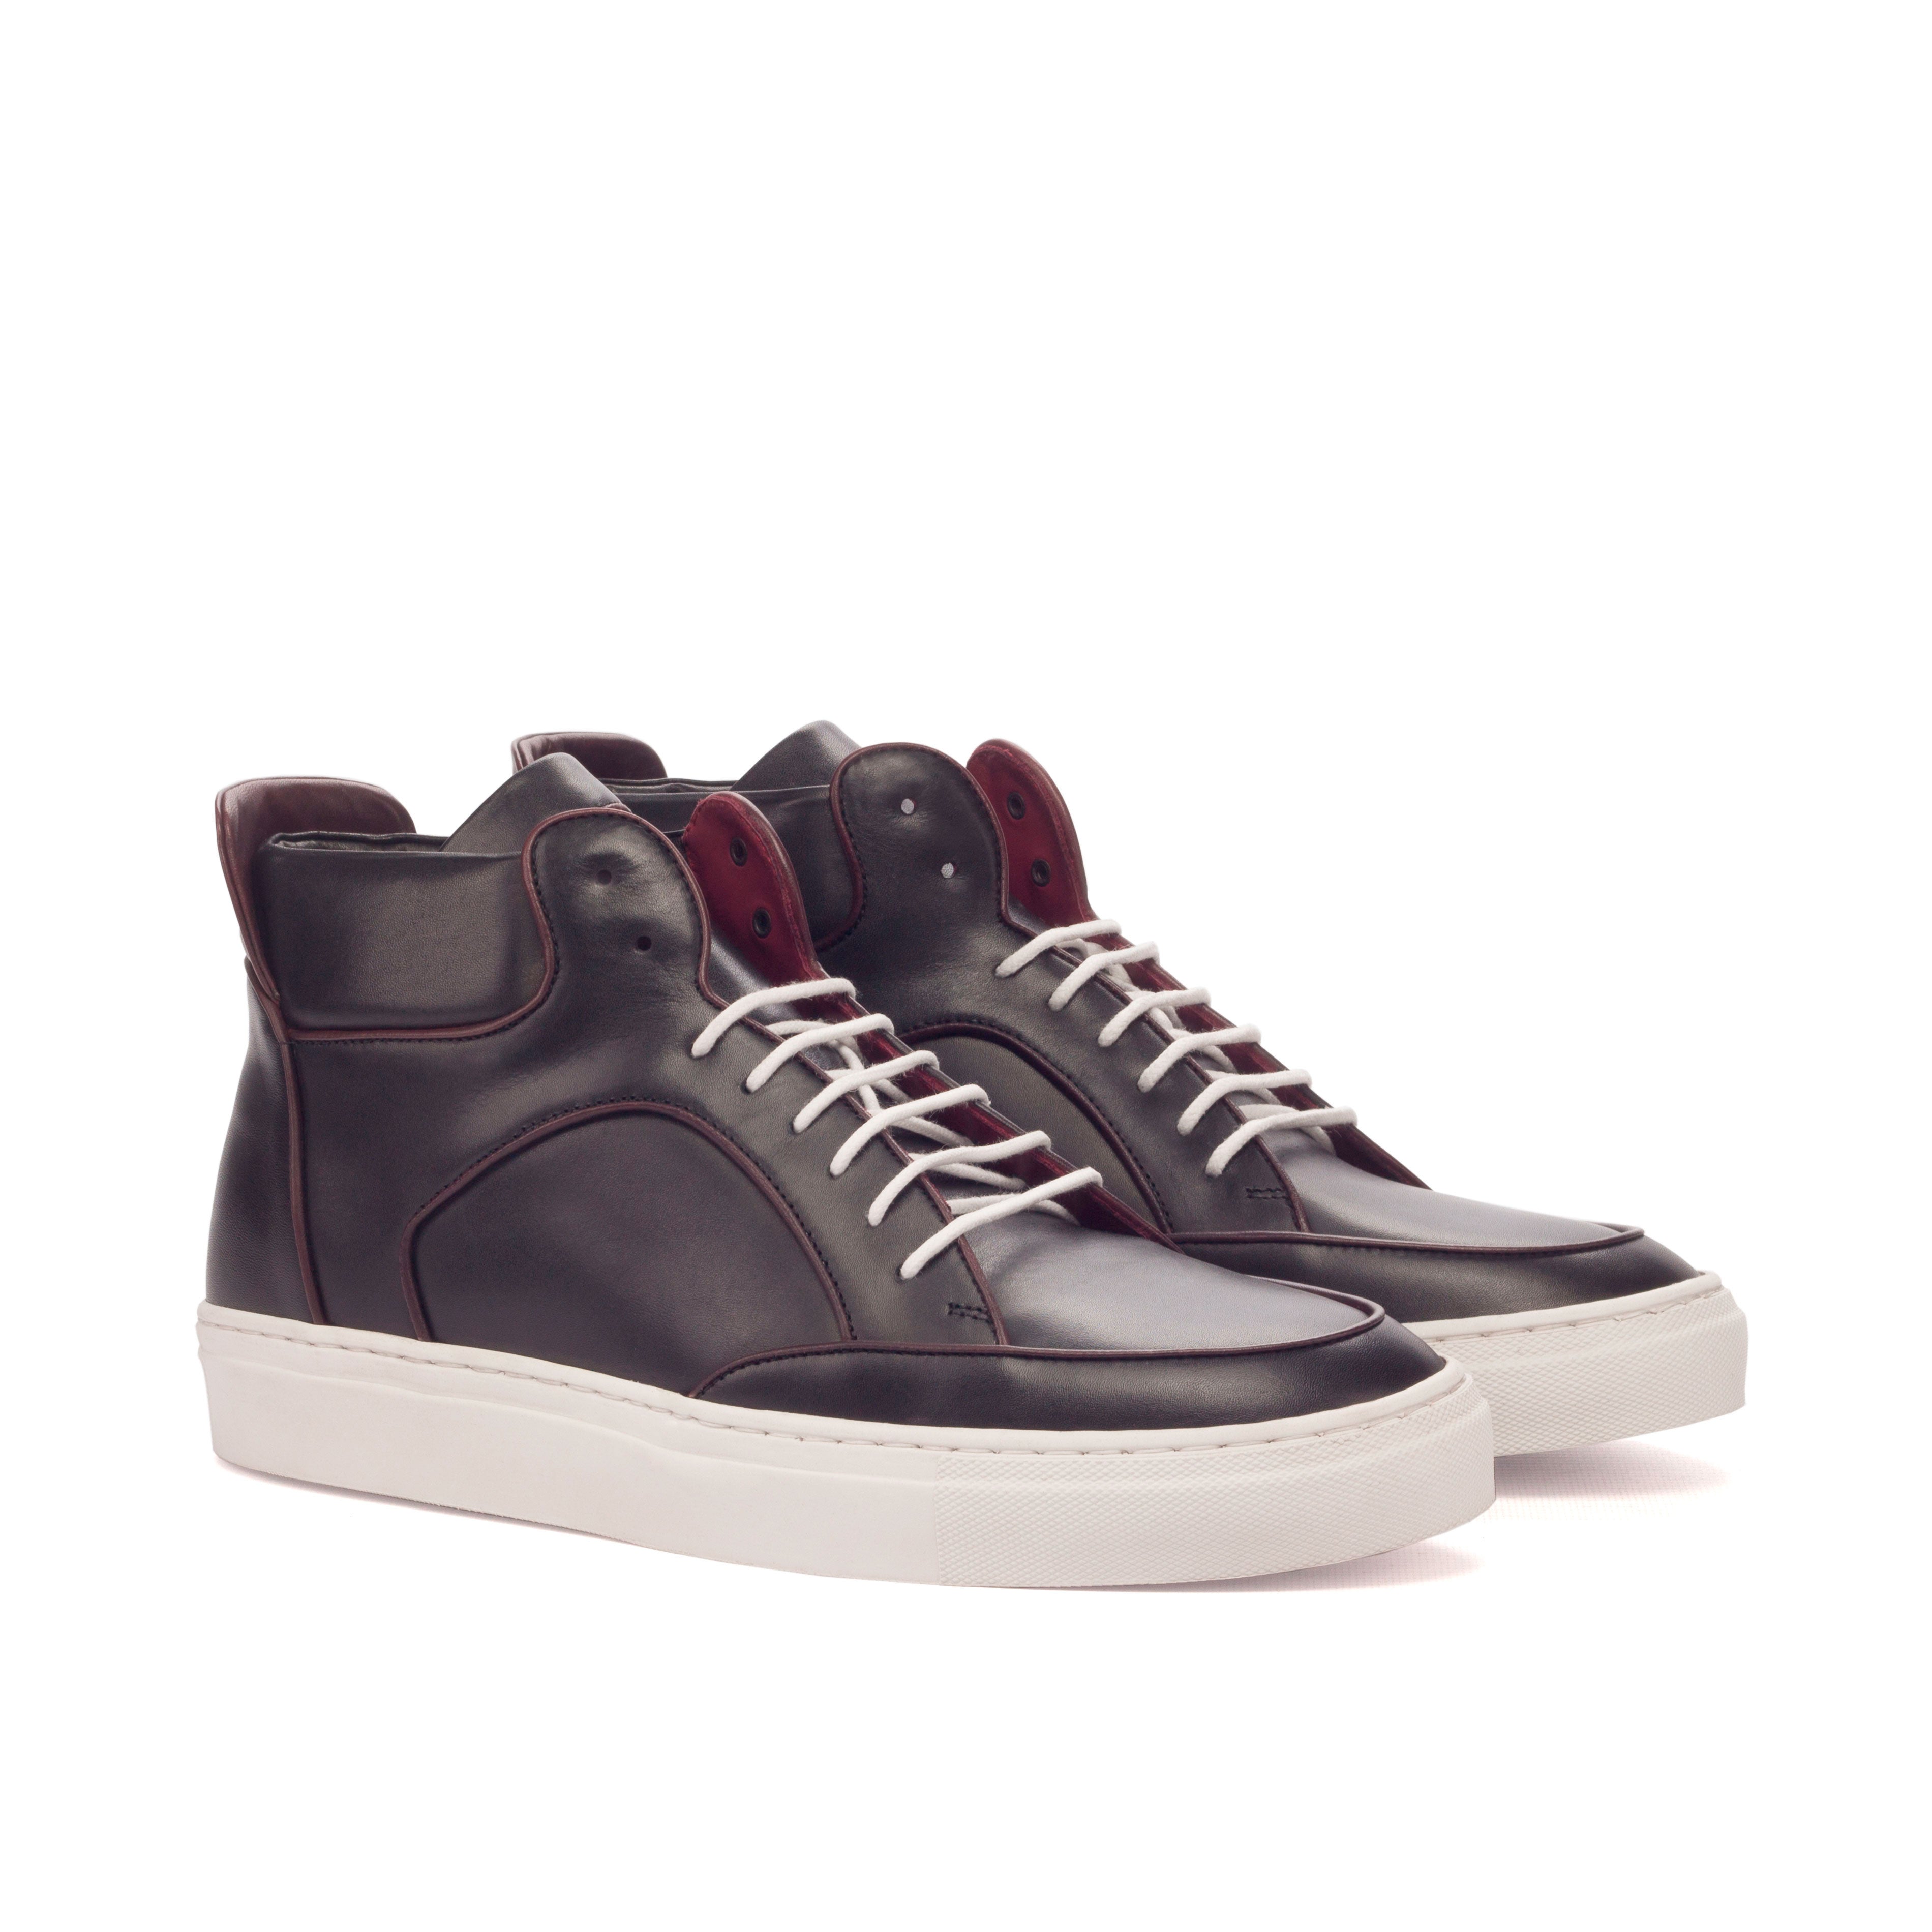 High Sneakers black & bordeaux leather